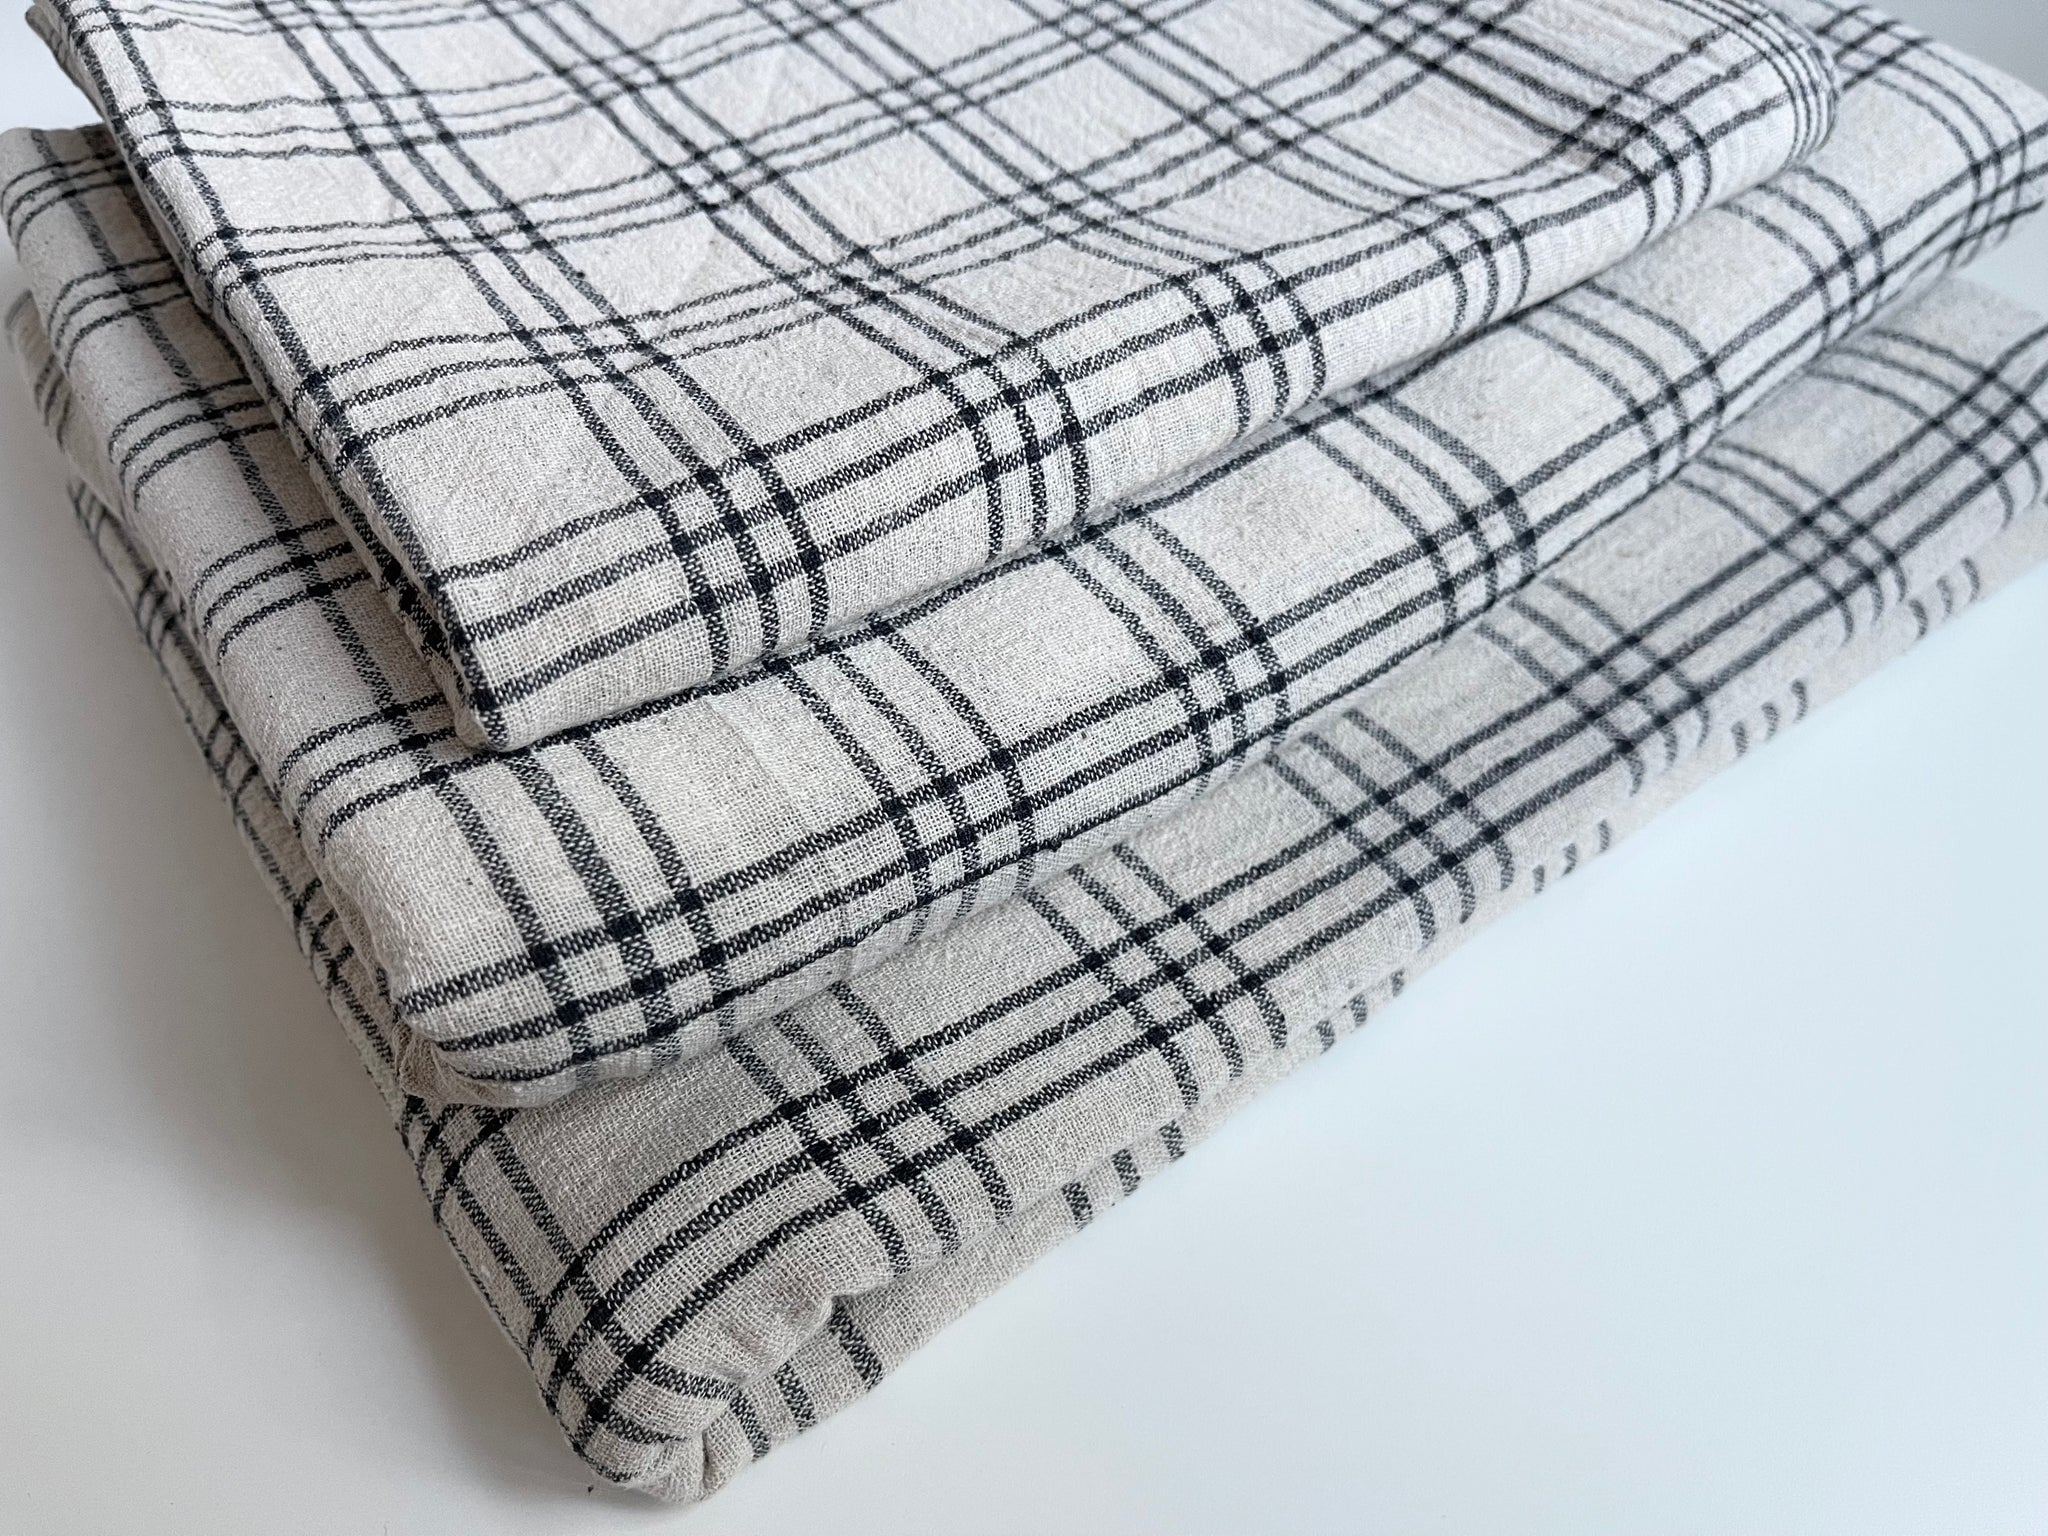 Handwoven Cotton Fabric Bundle - 6.5 yards natural and black grid check